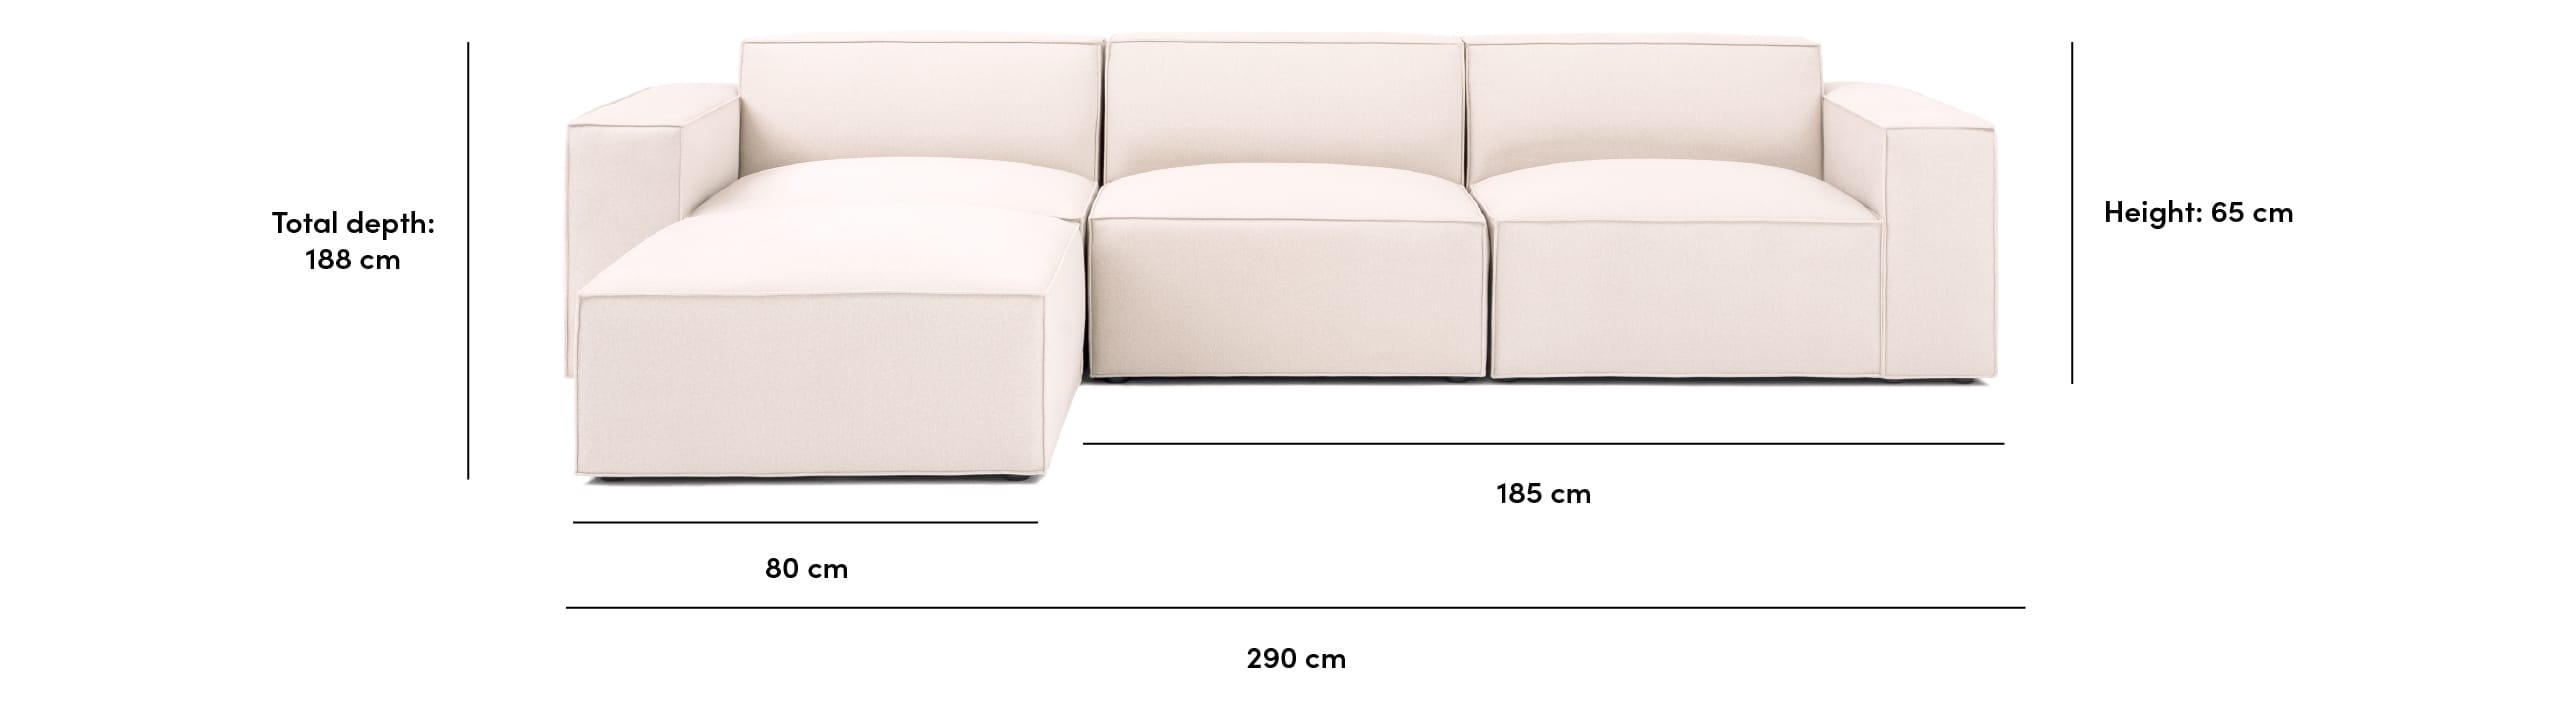 Pacific sectional dimensions